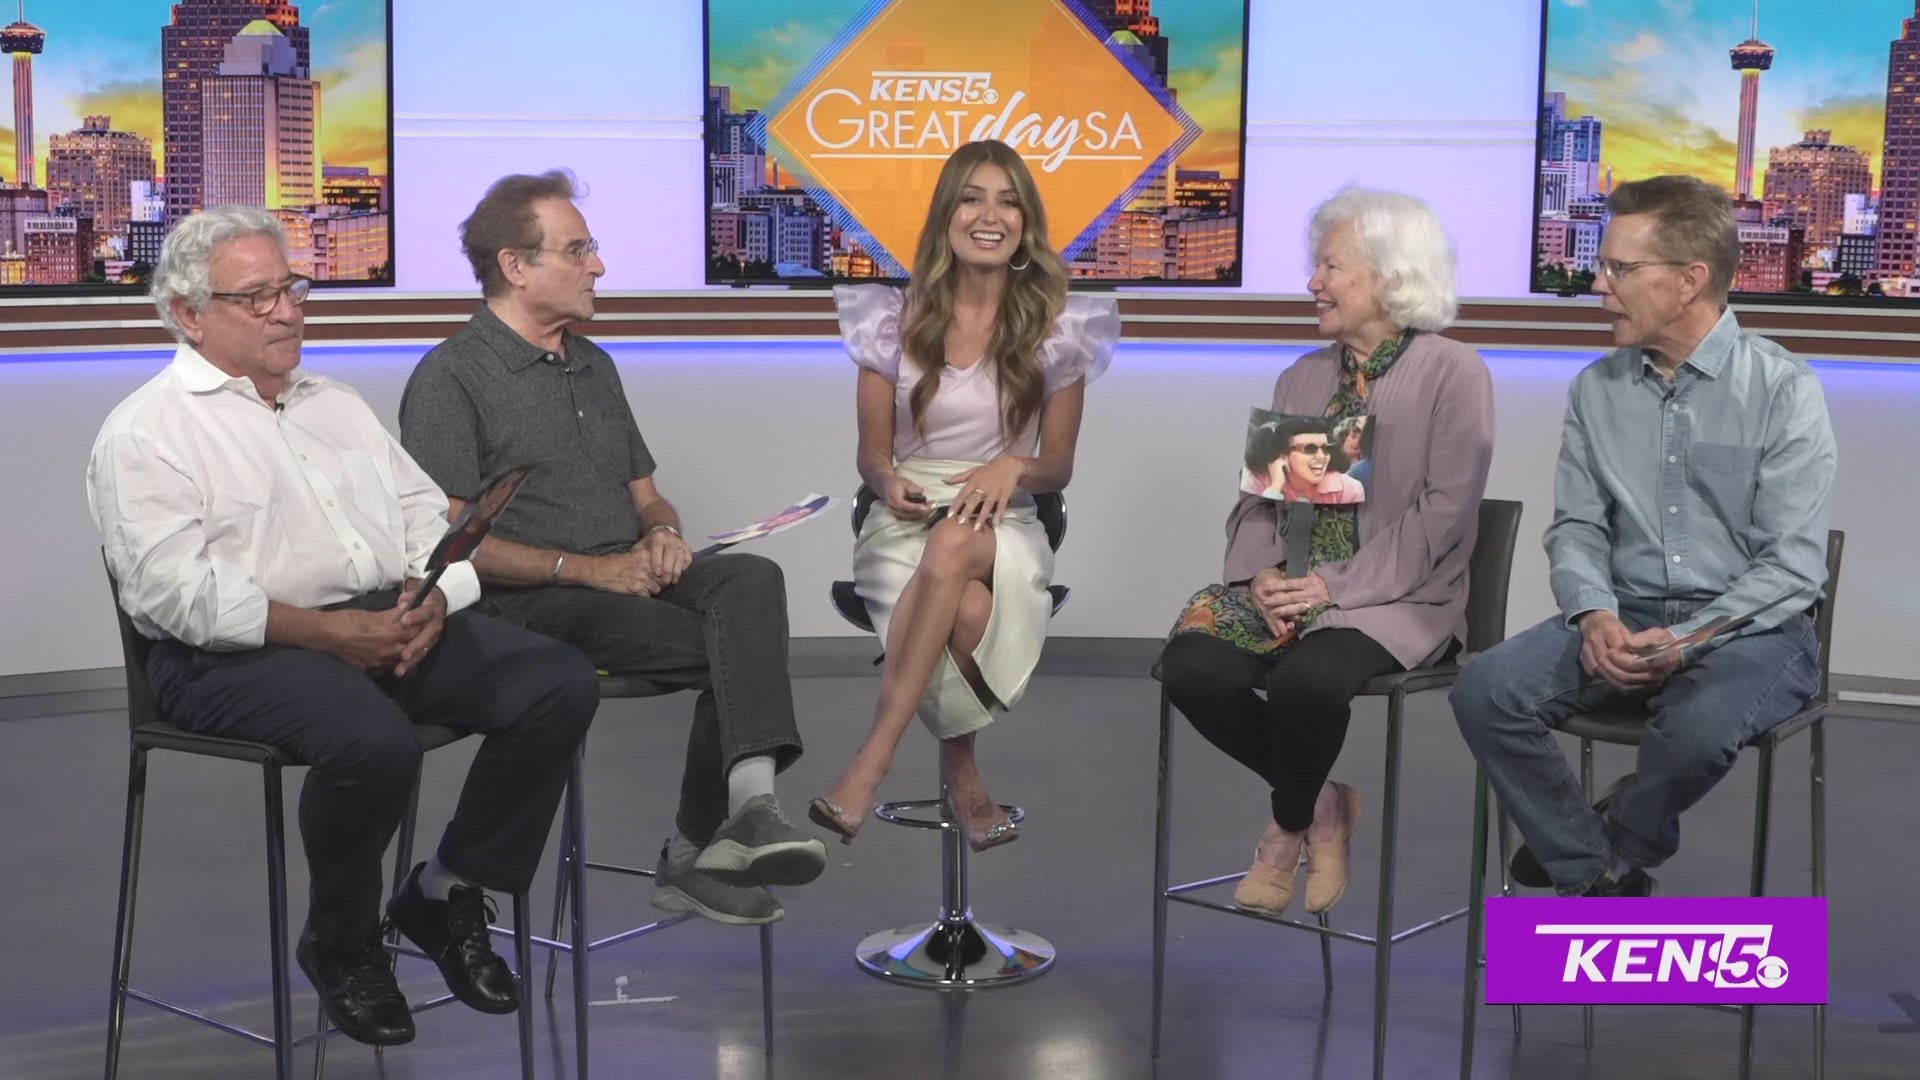 To celebrate the 45th Anniversary of the film, the cast of "Grease" stop by to chat about the Summer Lovin' Celebration this weekend.